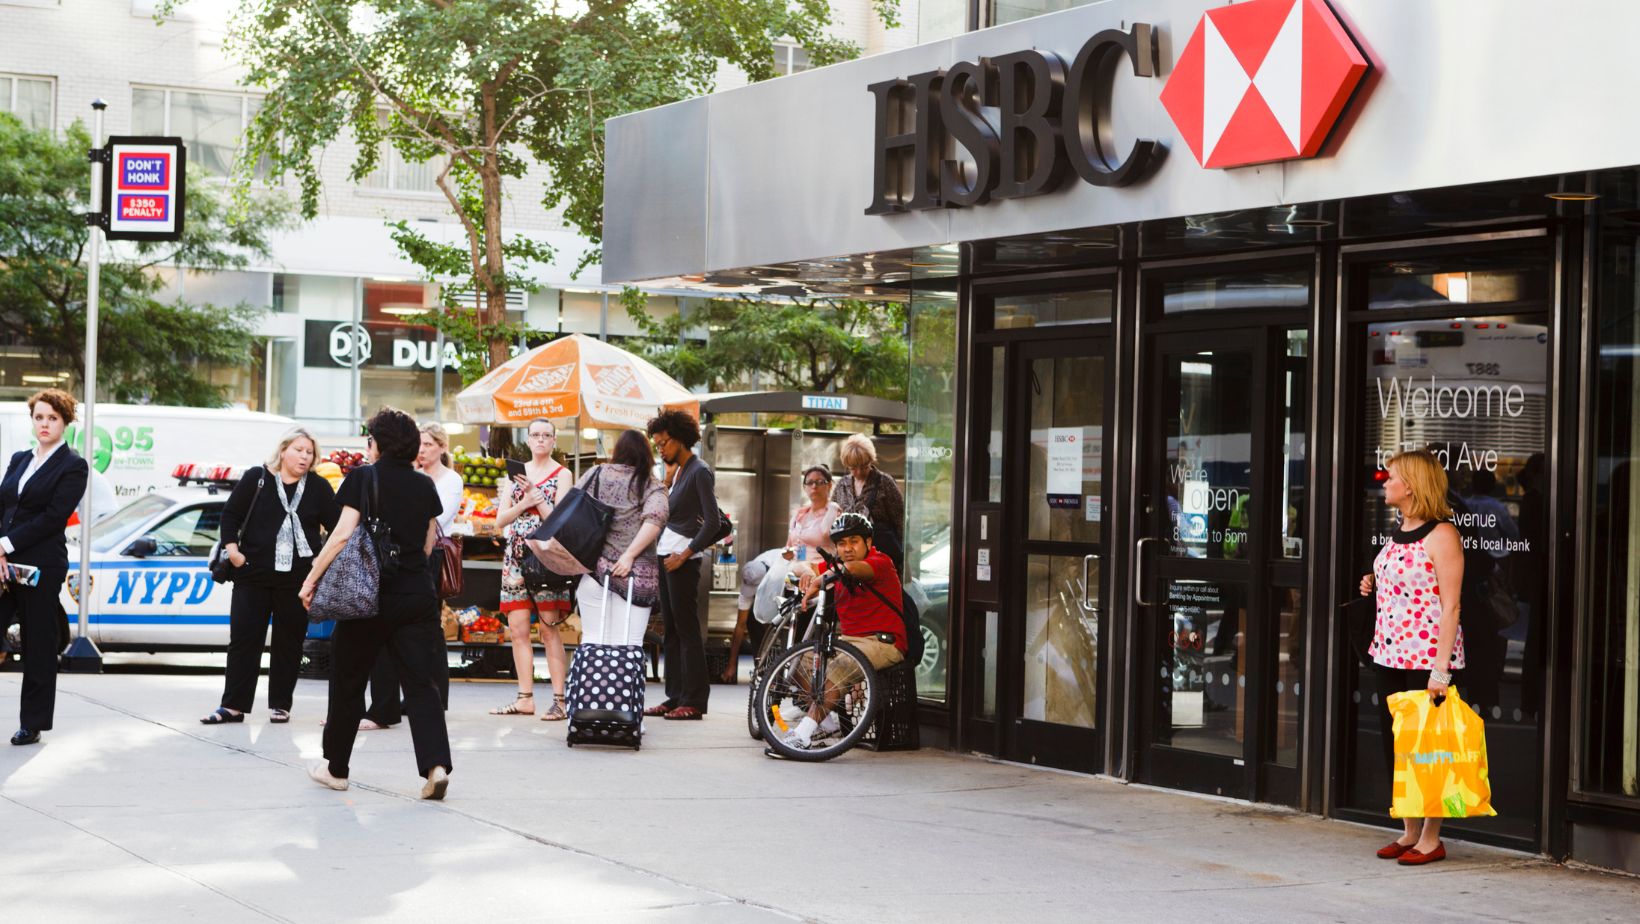 TOP 10 HSBC AGENCIES IN LONDON, ONLY BEST REVIEWS